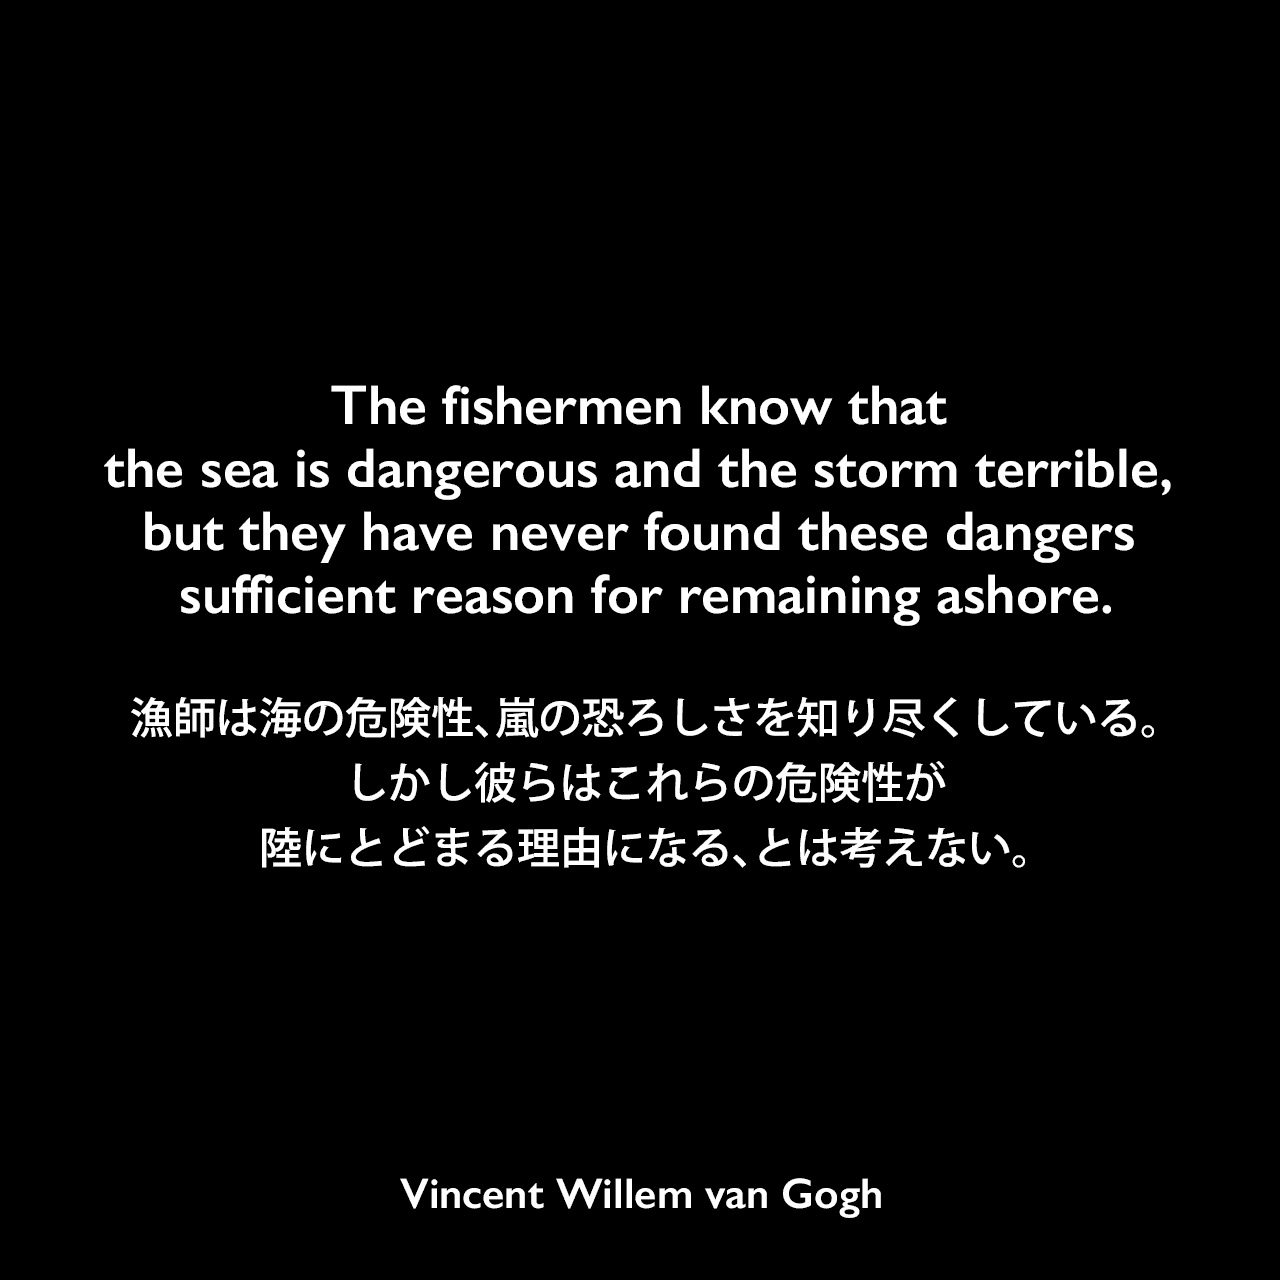 The fishermen know that the sea is dangerous and the storm terrible, but they have never found these dangers sufficient reason for remaining ashore.漁師は海の危険性、嵐の恐ろしさを知り尽くしている。しかし彼らはこれらの危険性が陸にとどまる理由になる、とは考えない。Vincent Willem van Gogh